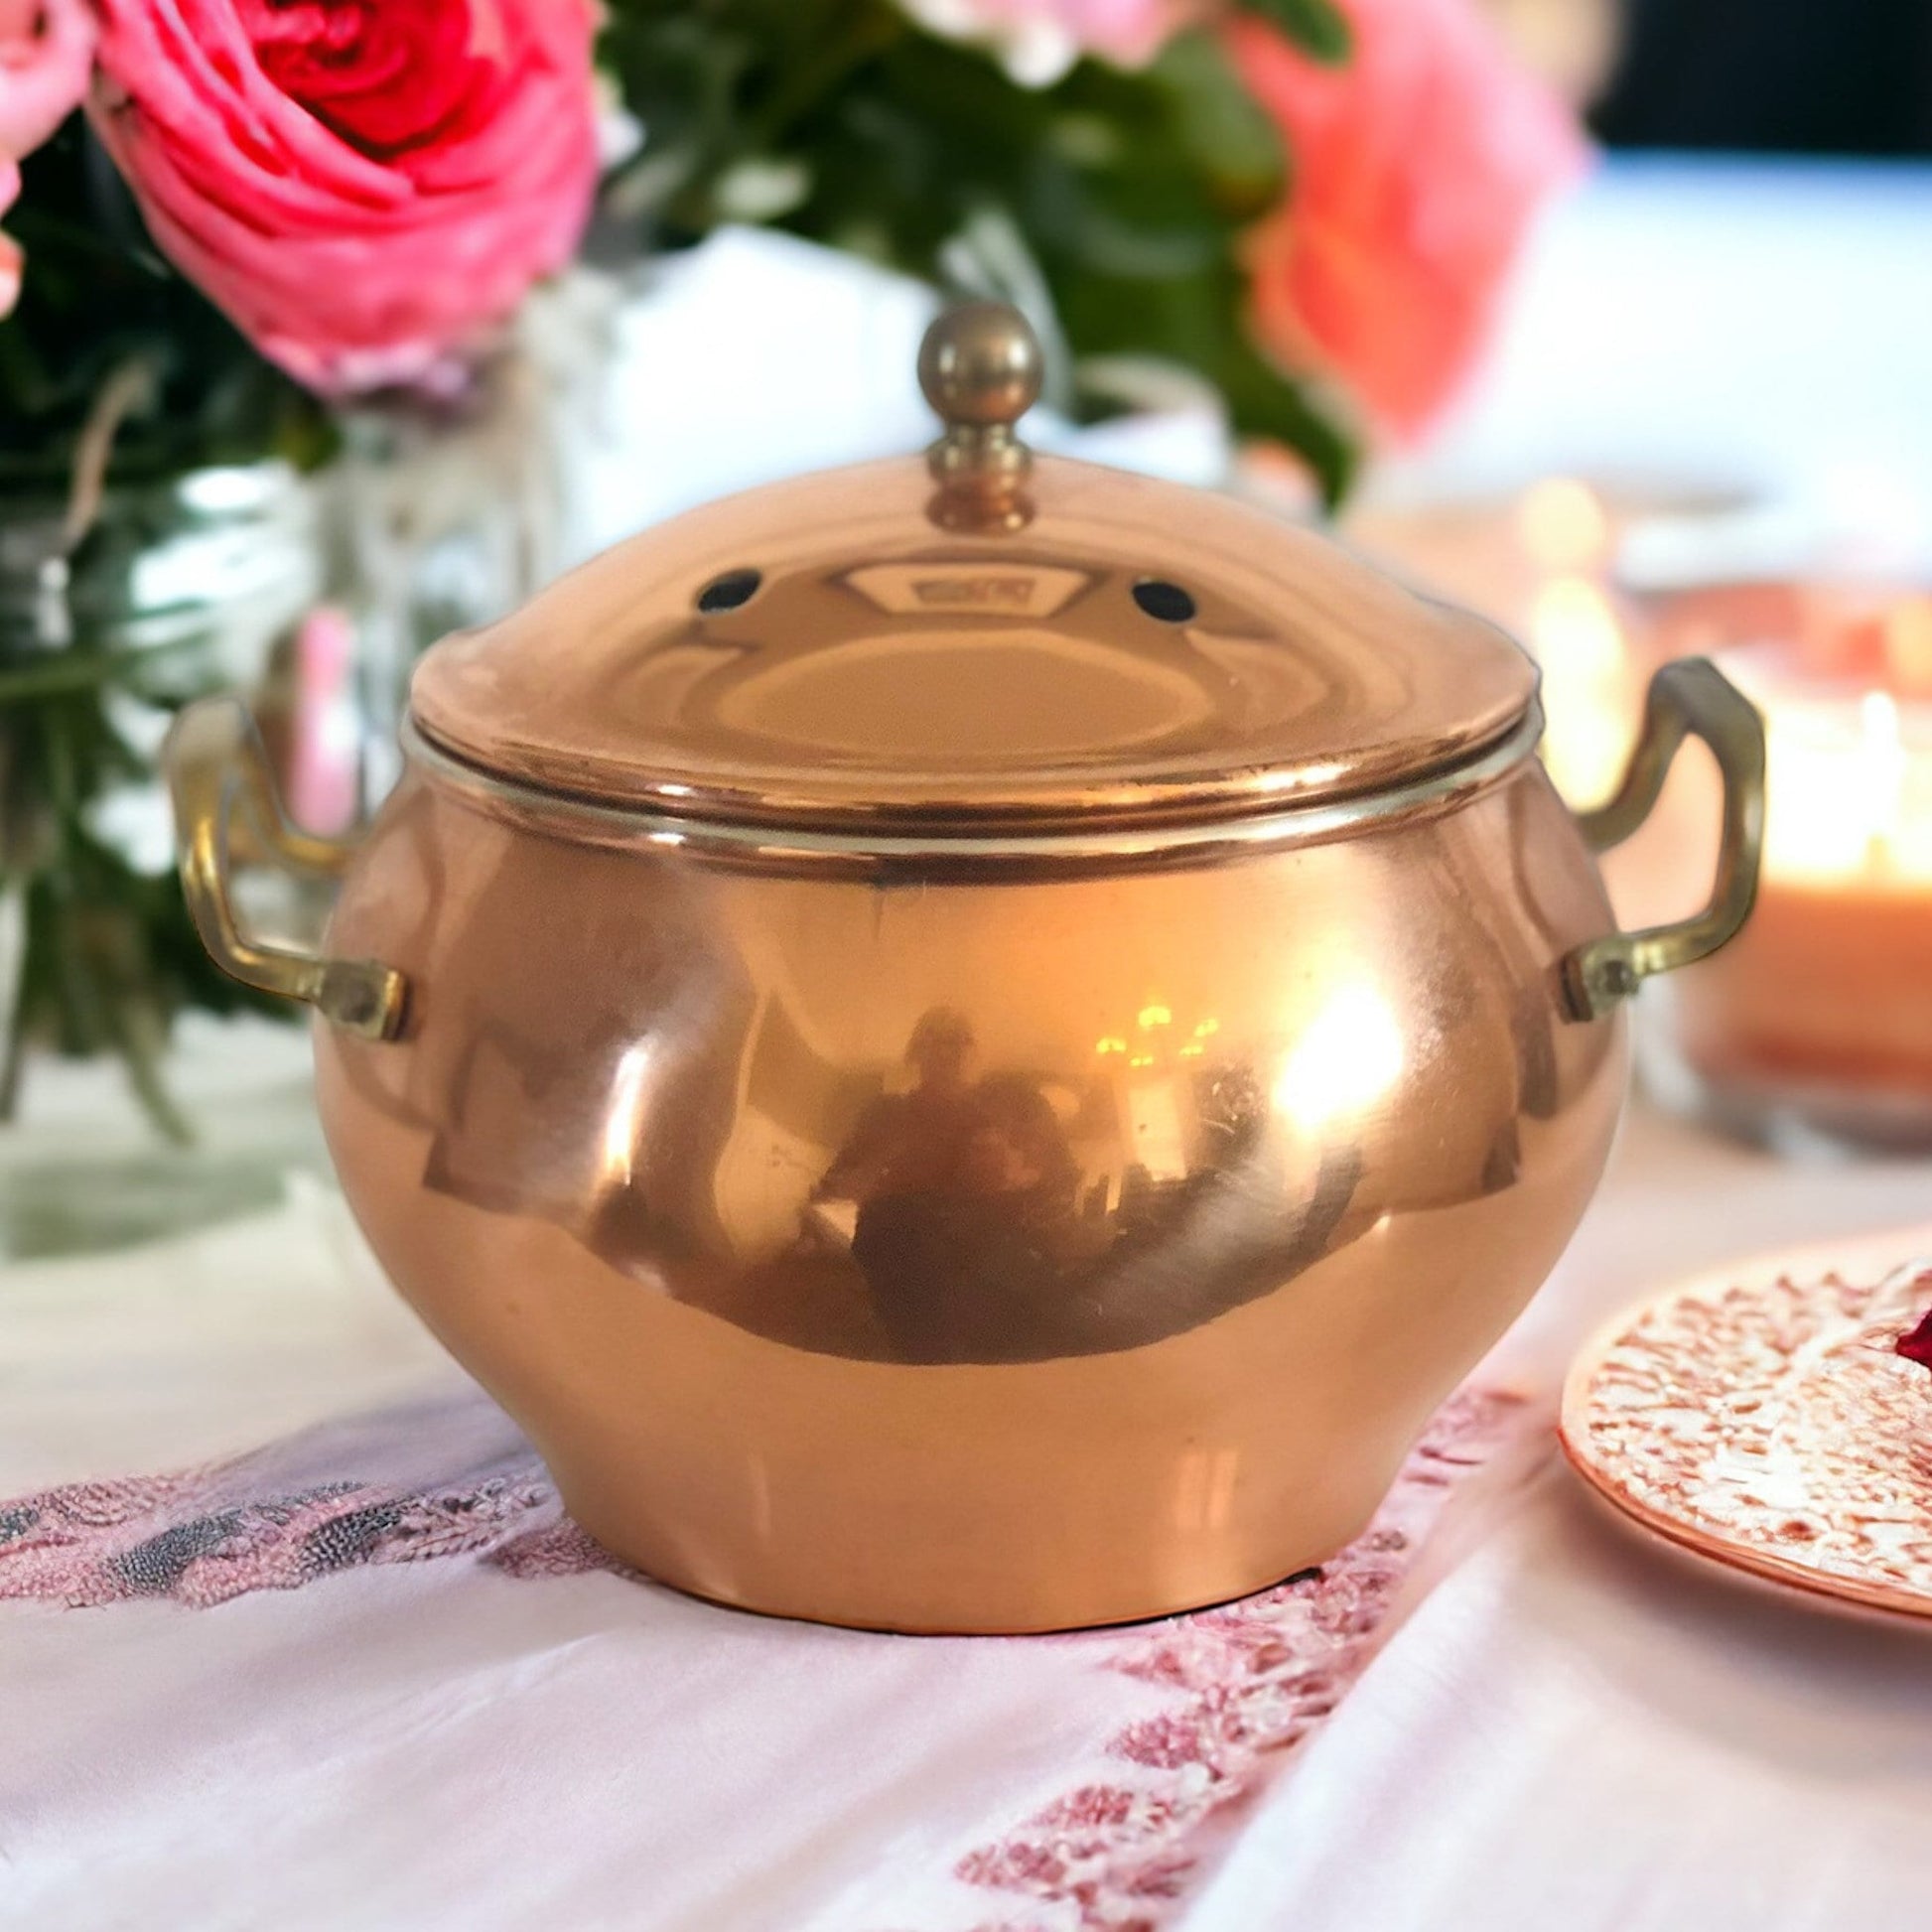 Scented Candles, Vintage, Copper Pot, Housewarming Gift, Best Friend Gifts